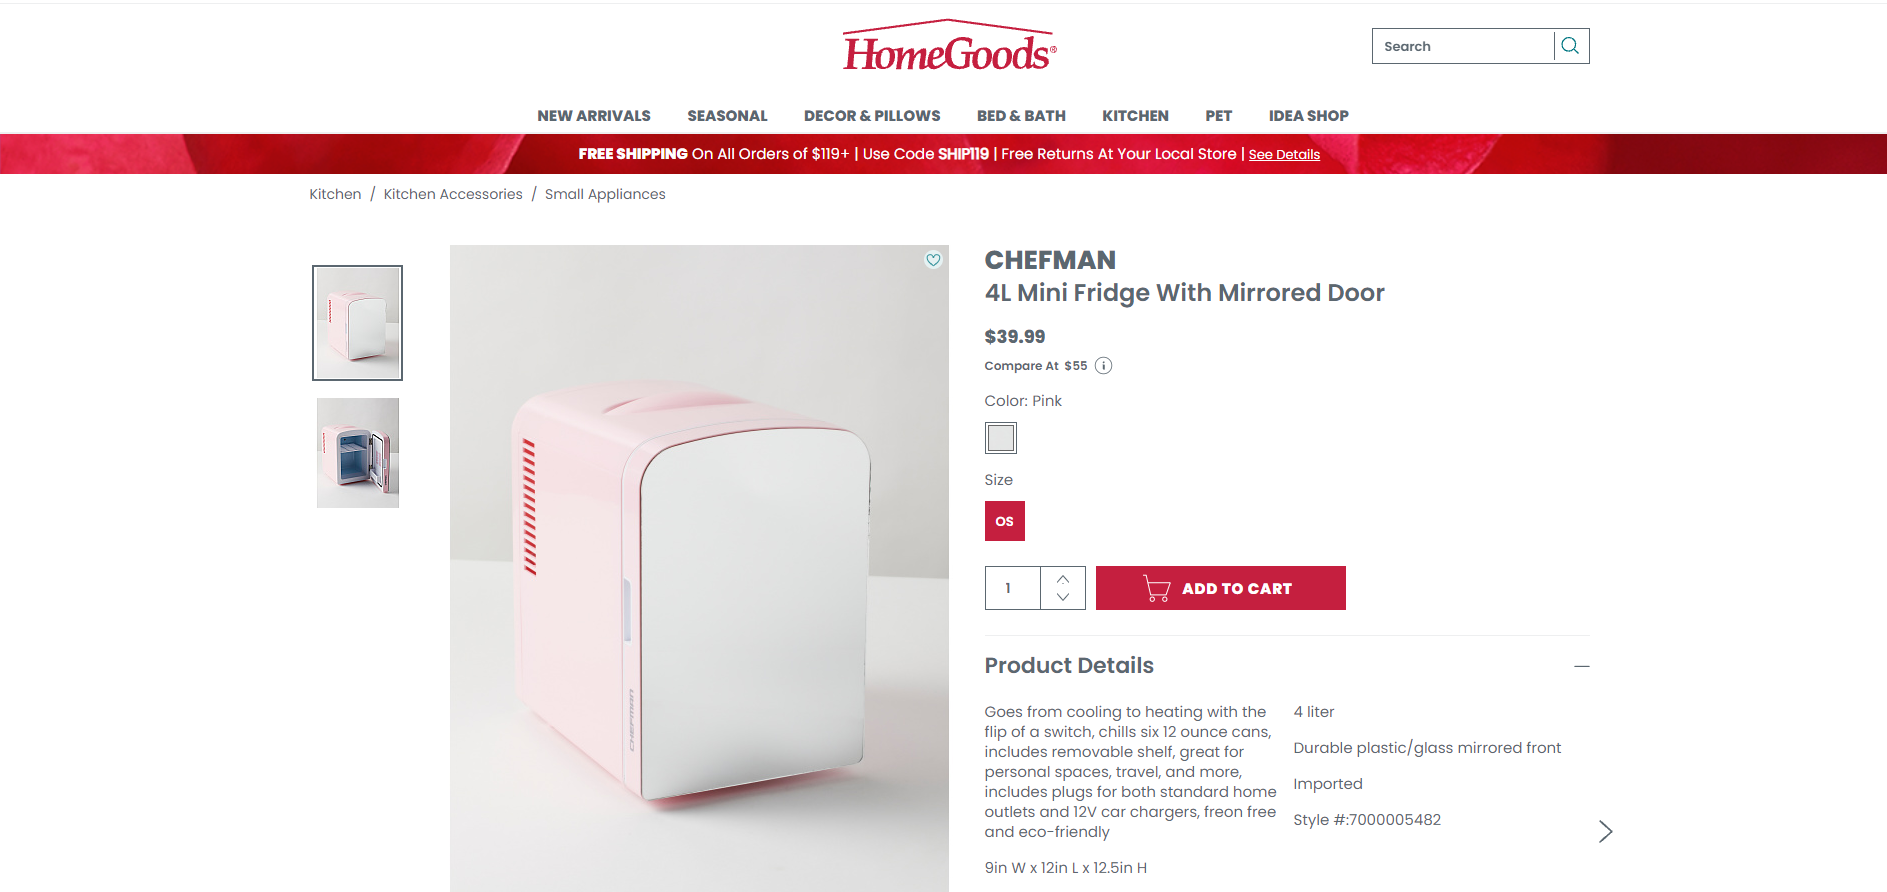 A picture of a mini fridge on HomeGoods' website.